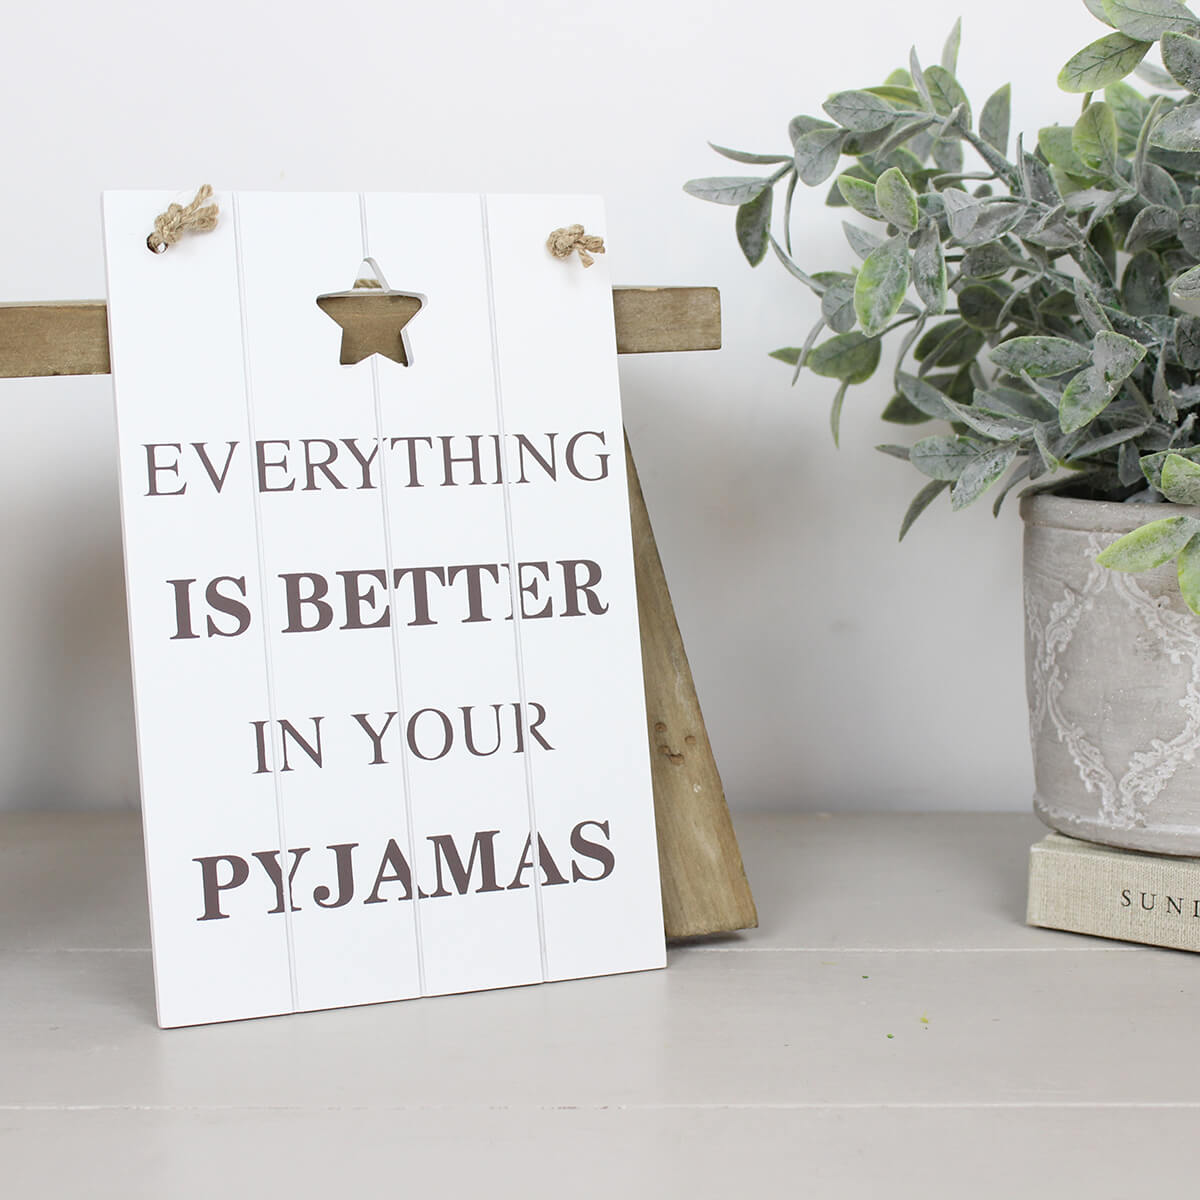 'Everything Is Better In Your Pyjamas' Sign